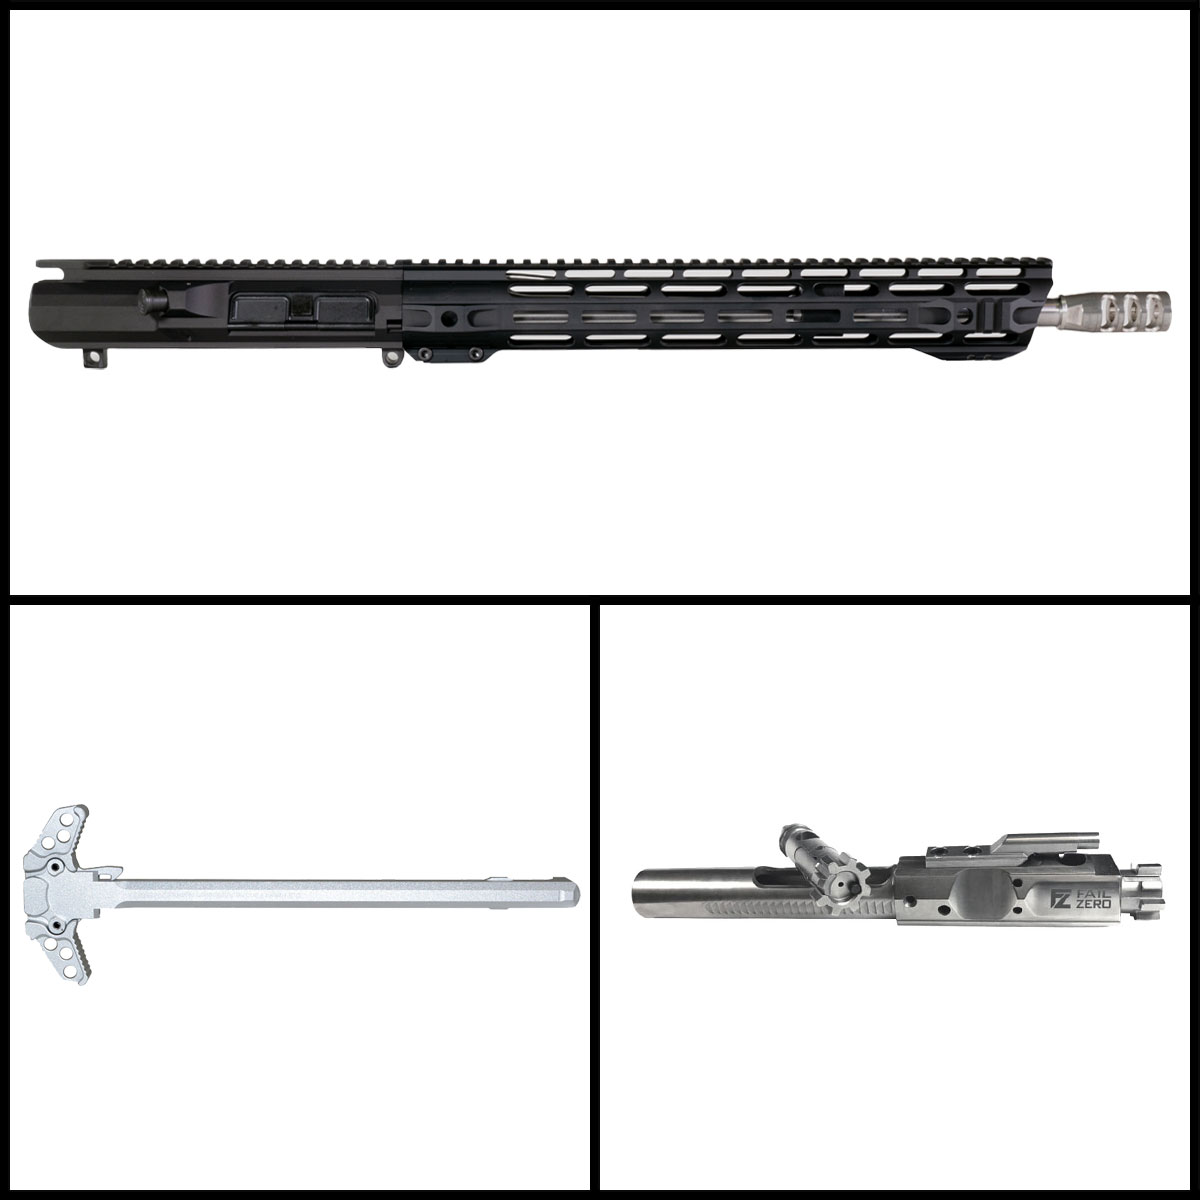 Davidson Defense 'Swiftwind' 16-inch LR-308 .308 Win Stainless Rifle Complete Upper Build Kit